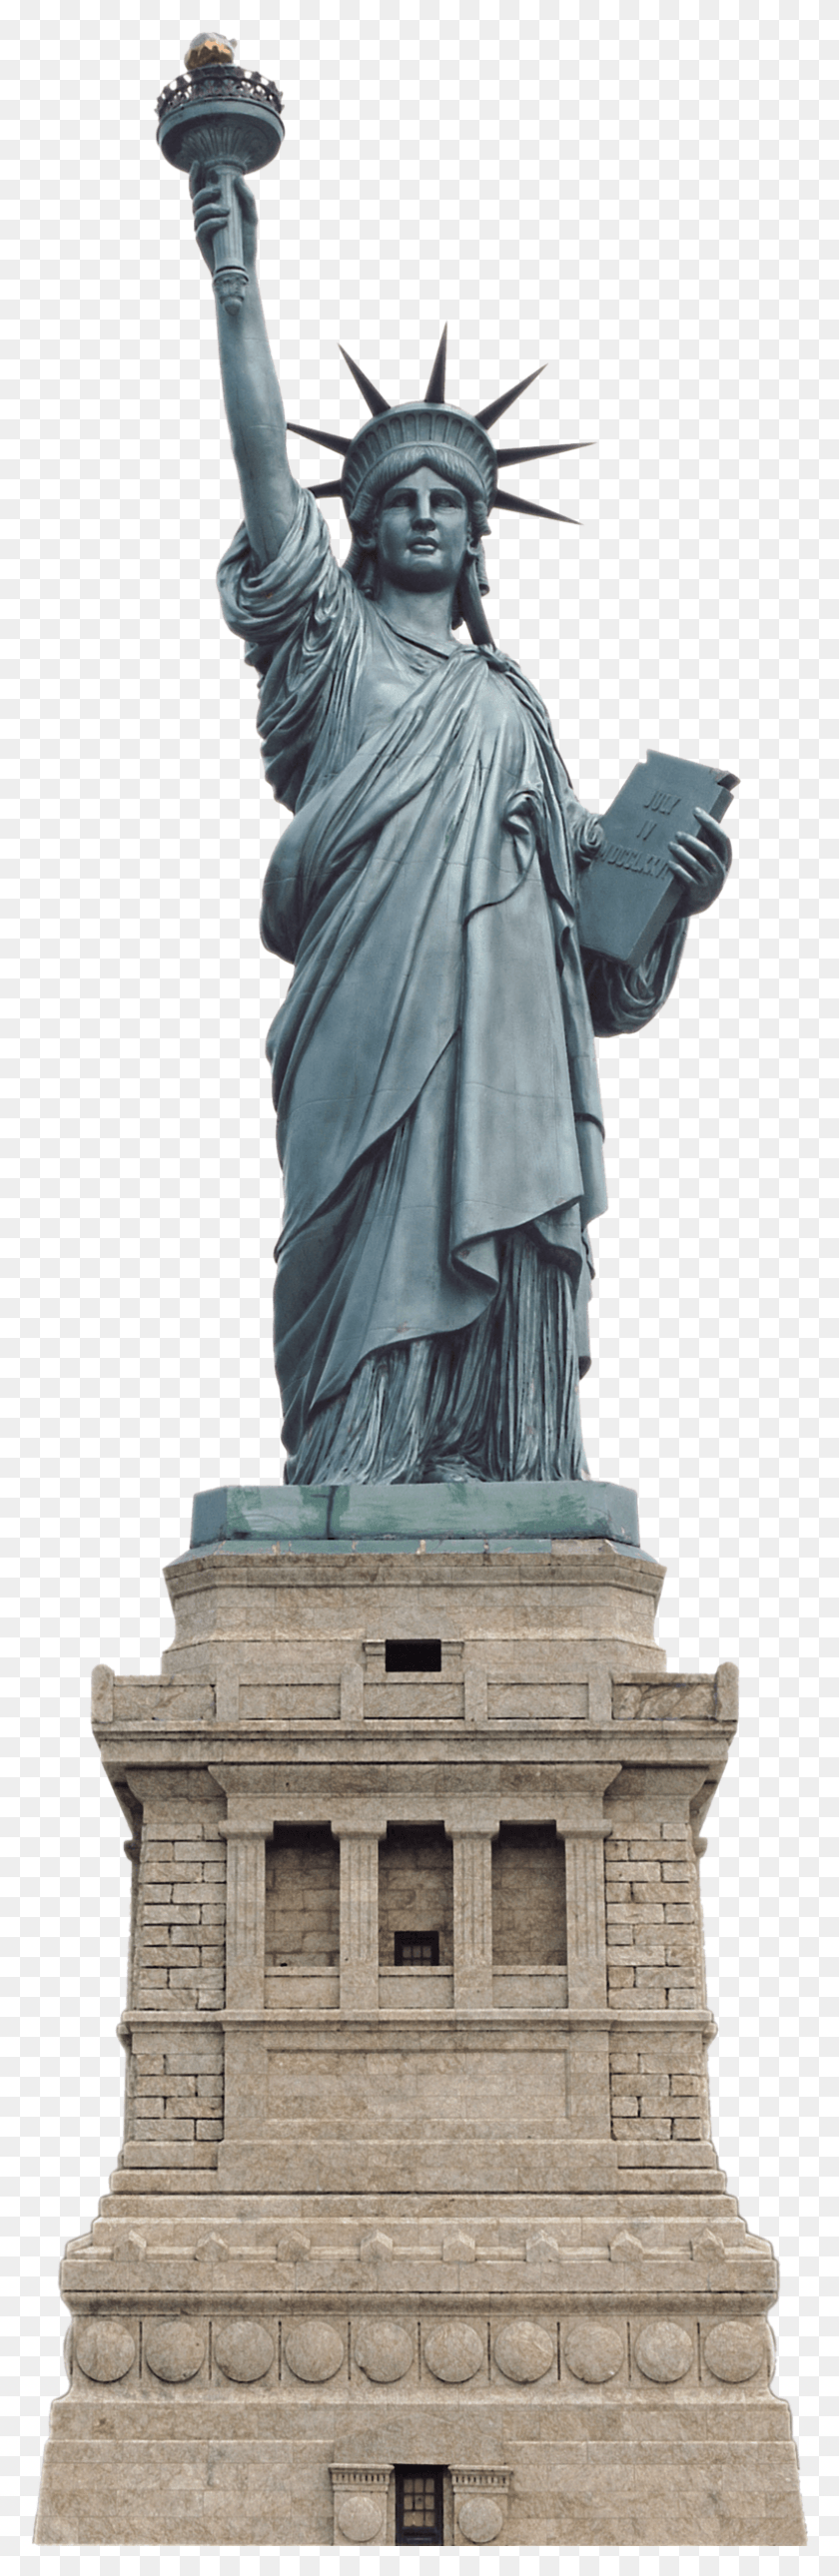 789x2550 Statue Of Liberty Images Transparent Gallery Statue Of Liberty Transparent Background, Sculpture, Monument HD PNG Download